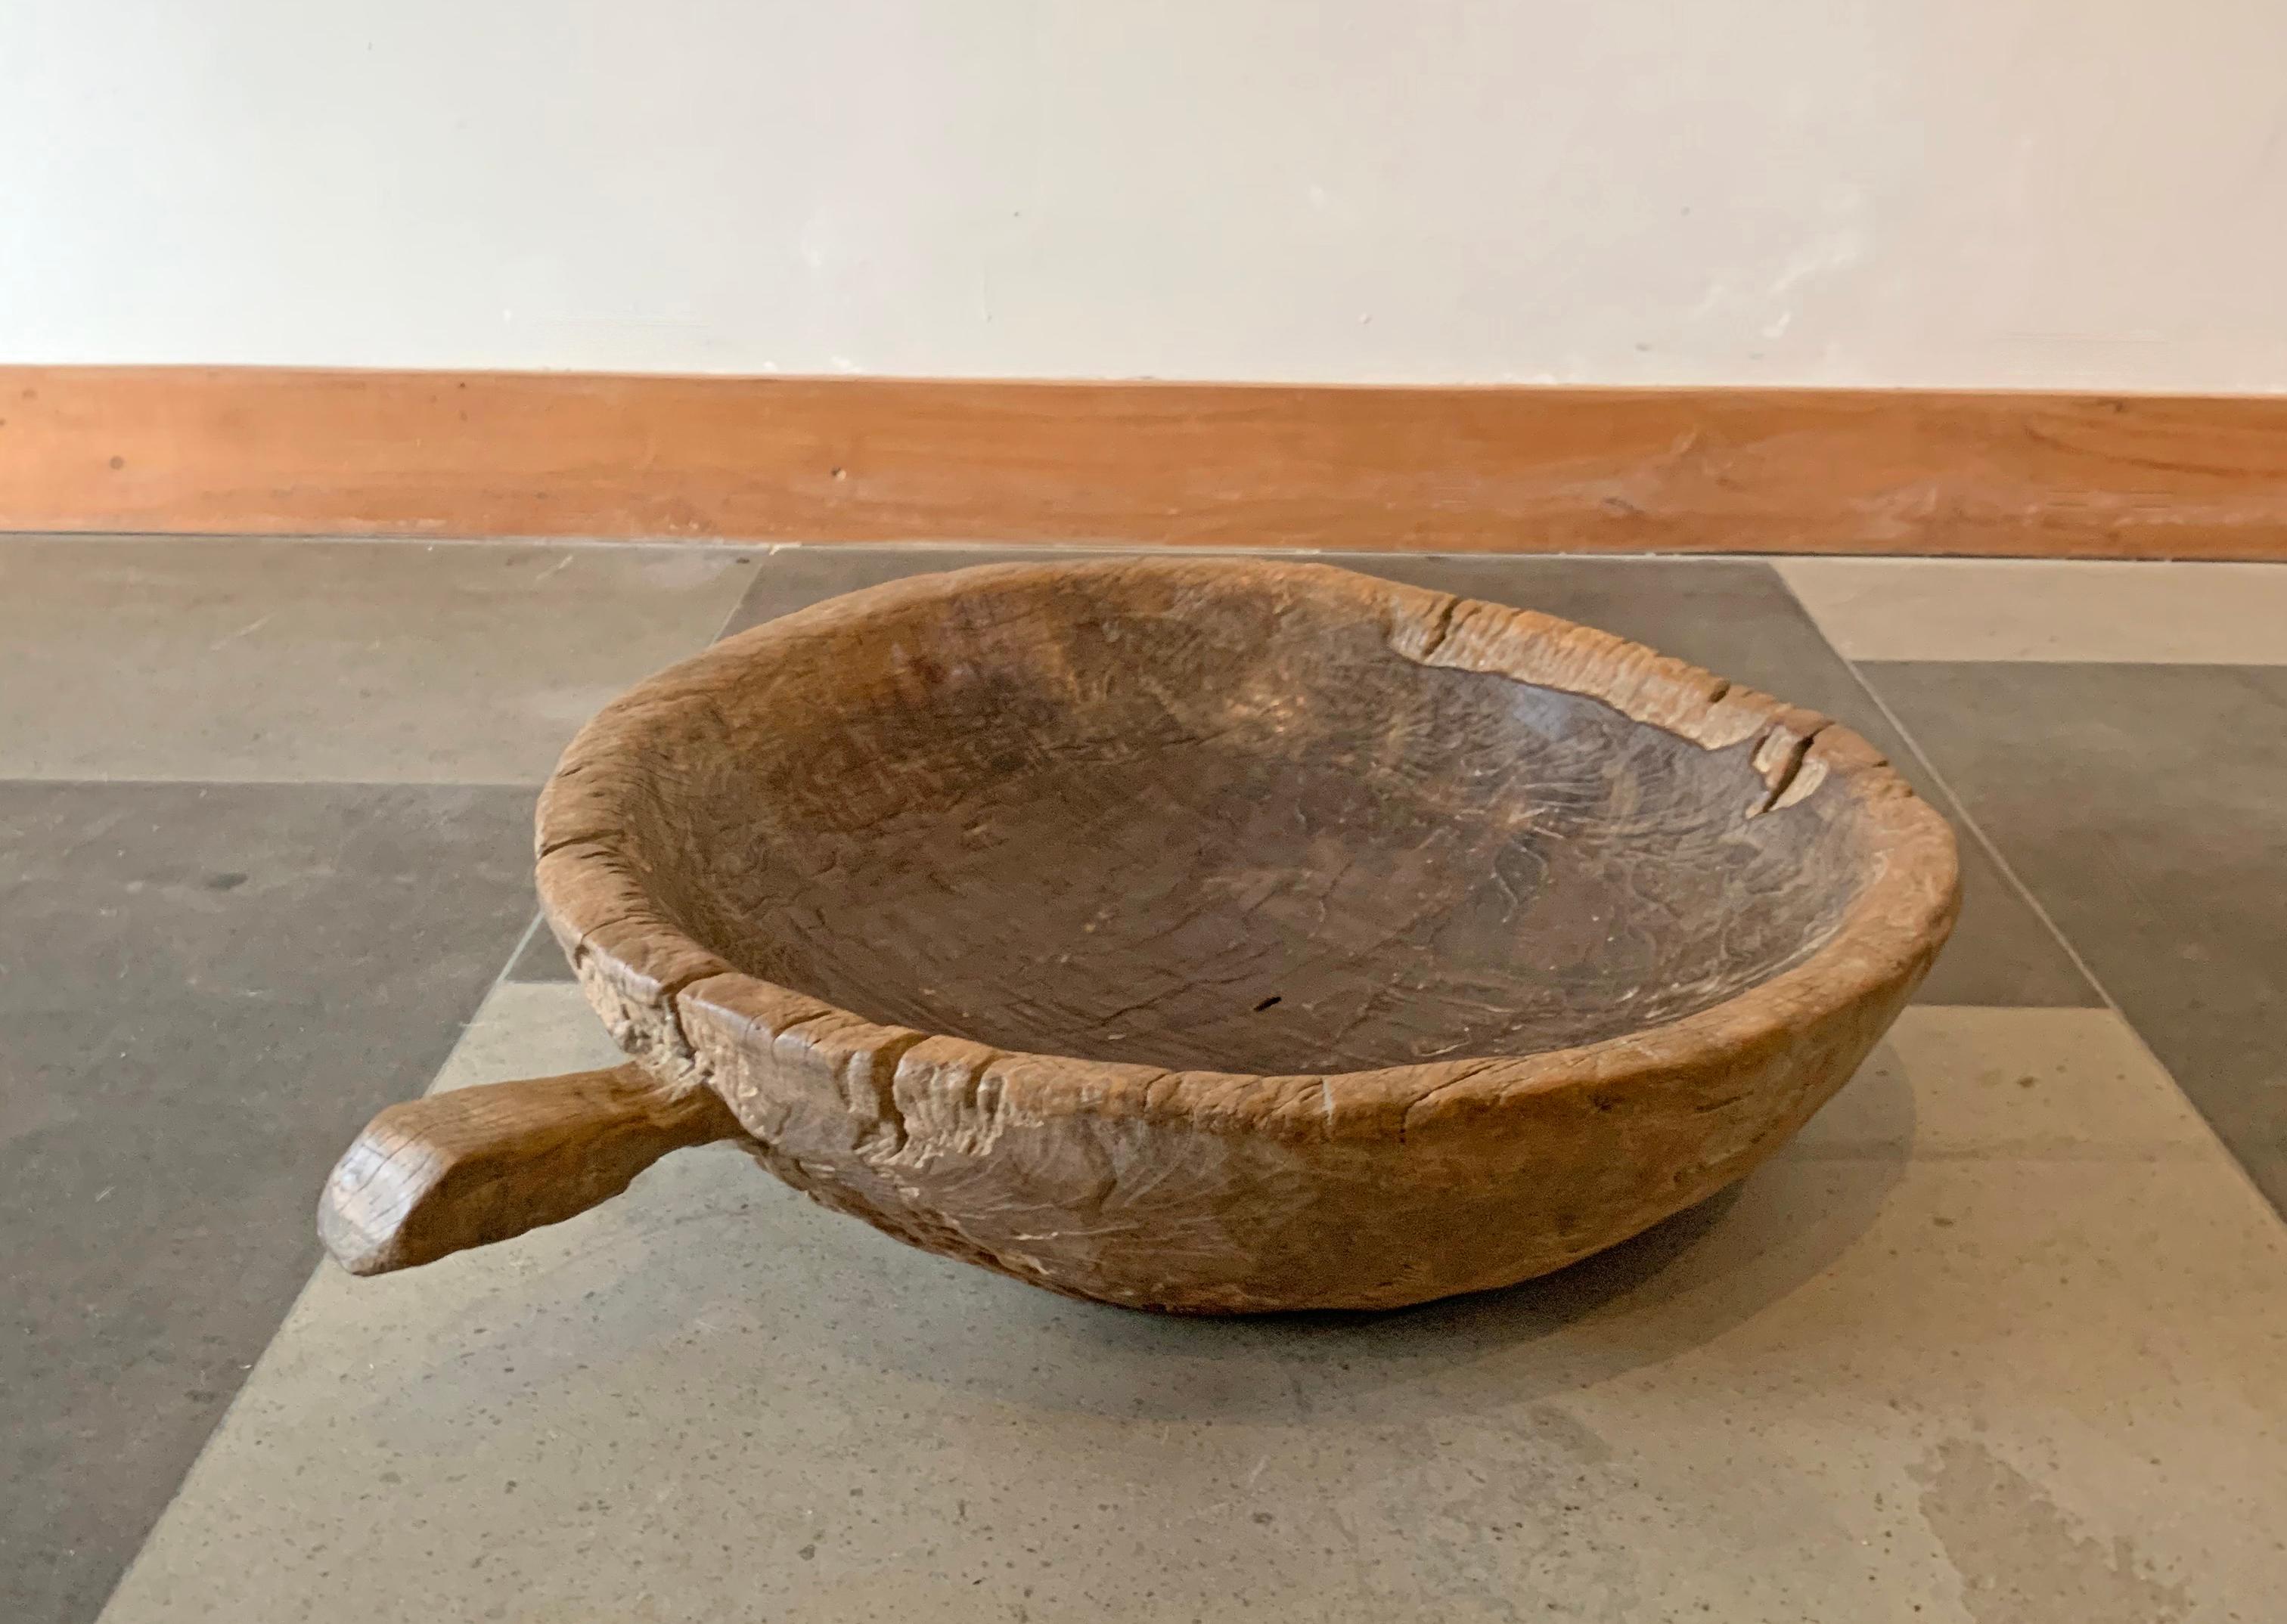 A teak burl wood bowl crafted on the island of Java, Indonesia. The bowl was cut from a much larger slab of burl wood and maintains an organic shape and natural texture. It has aged considerably over the decades contributing to its appeal.